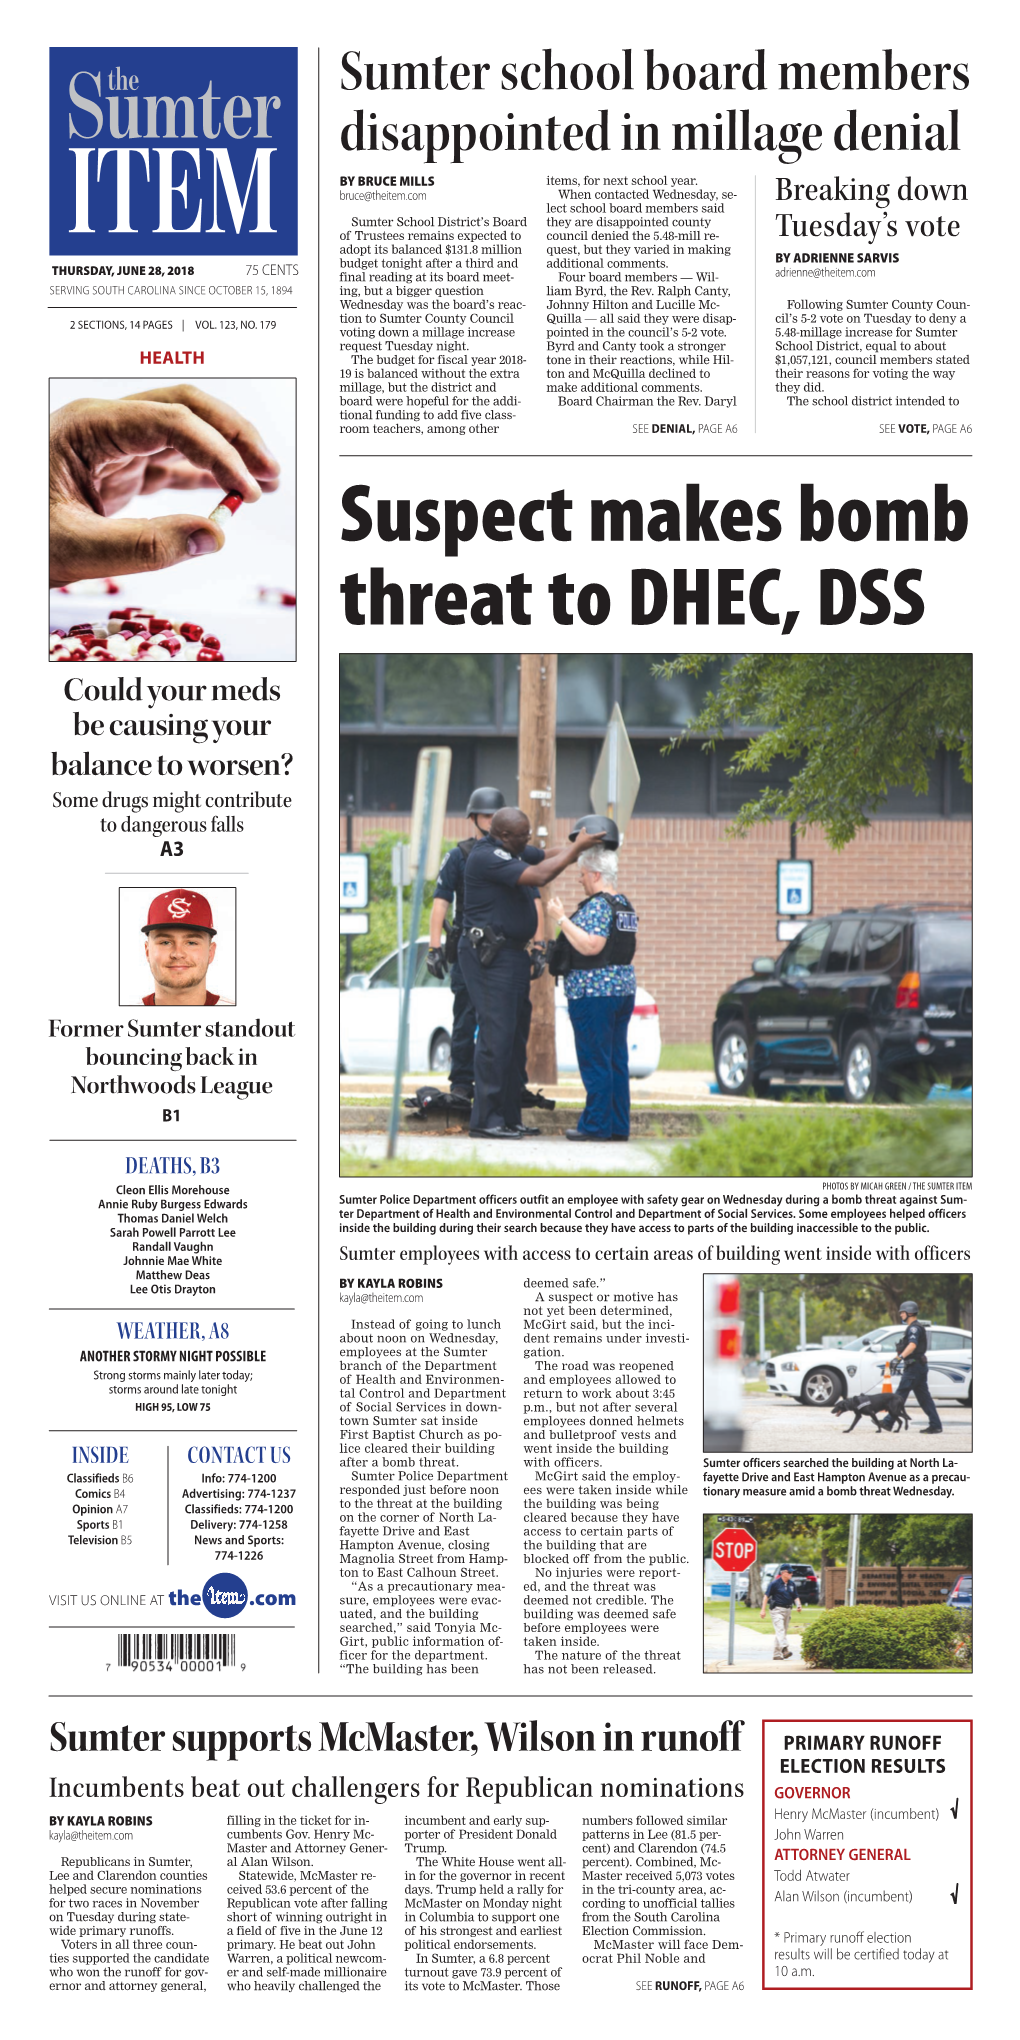 Suspect Makes Bomb Threat to DHEC, DSS Could Your Meds Be Causing Your Balance to Worsen? Some Drugs Might Contribute to Dangerous Falls A3